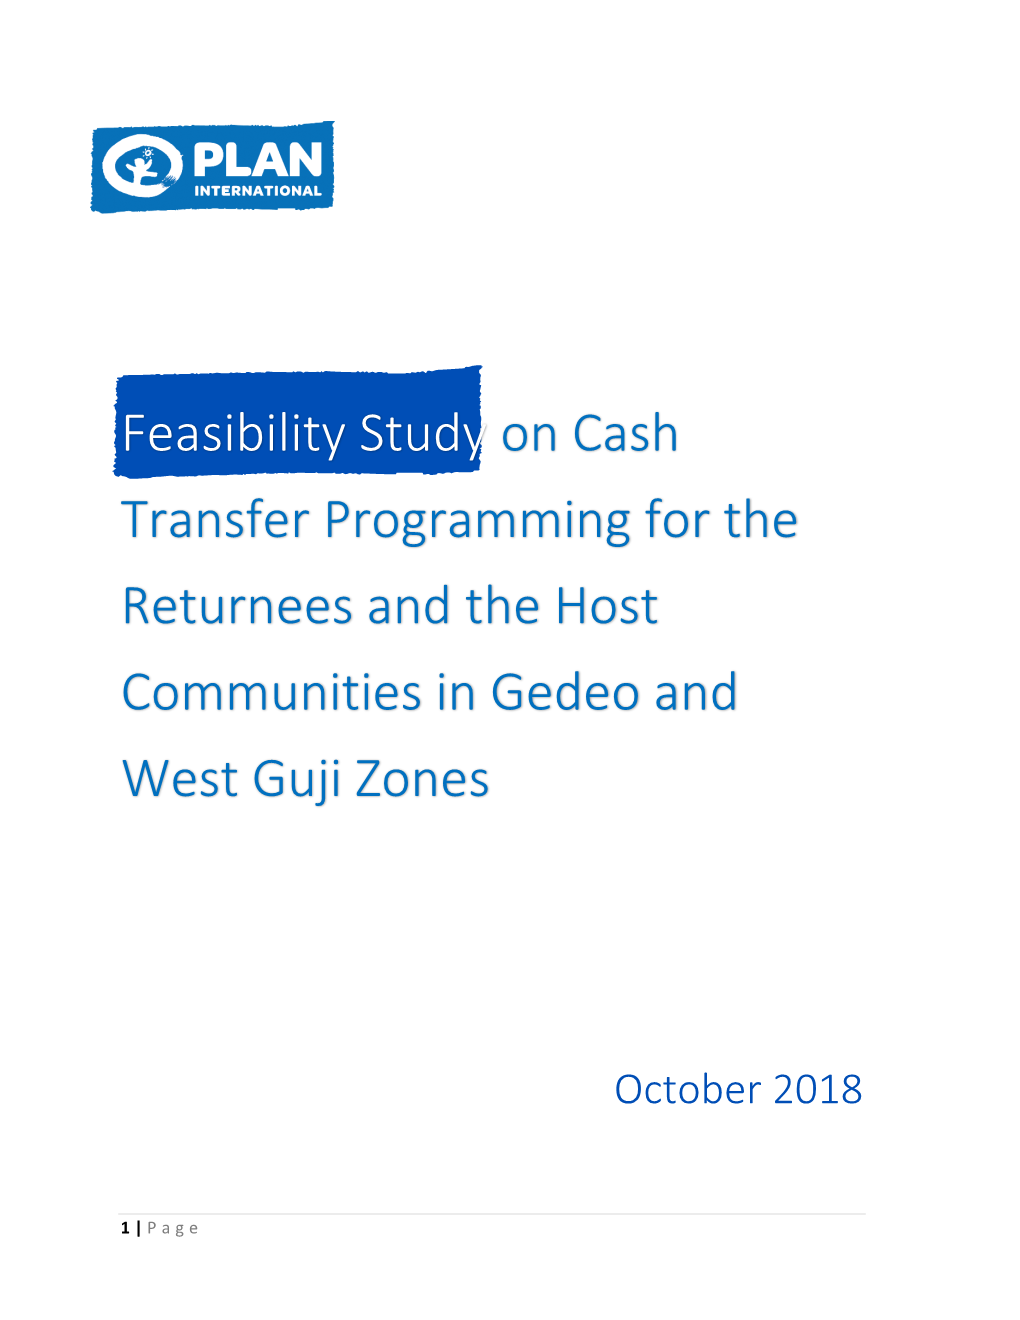 Feasibility Study on Cash Transfer Programming for the Returnees and the Host Communities in Gedeo and West Guji Zones